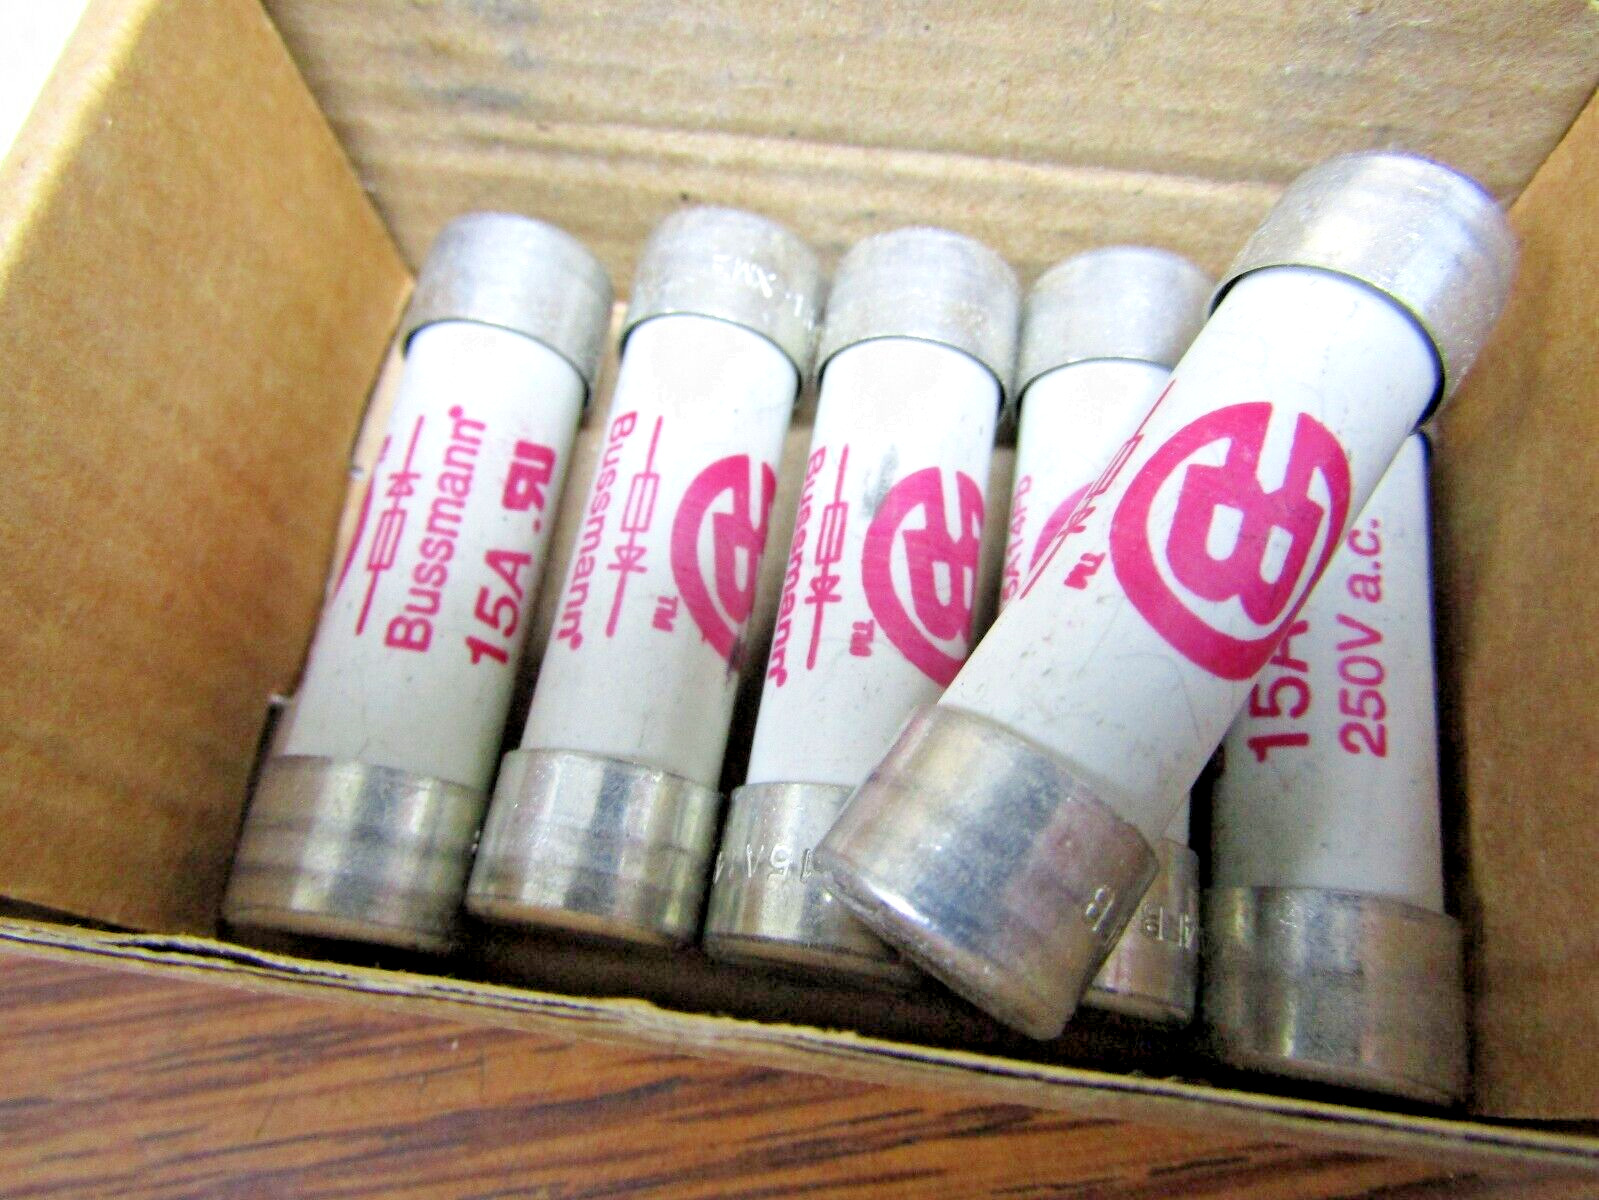 ✌ 6) NEW BUSSMANN FWX-15A14Fb SEMICONDUCTOR FUSE 15 AMPS 250VAC BOX OF 6